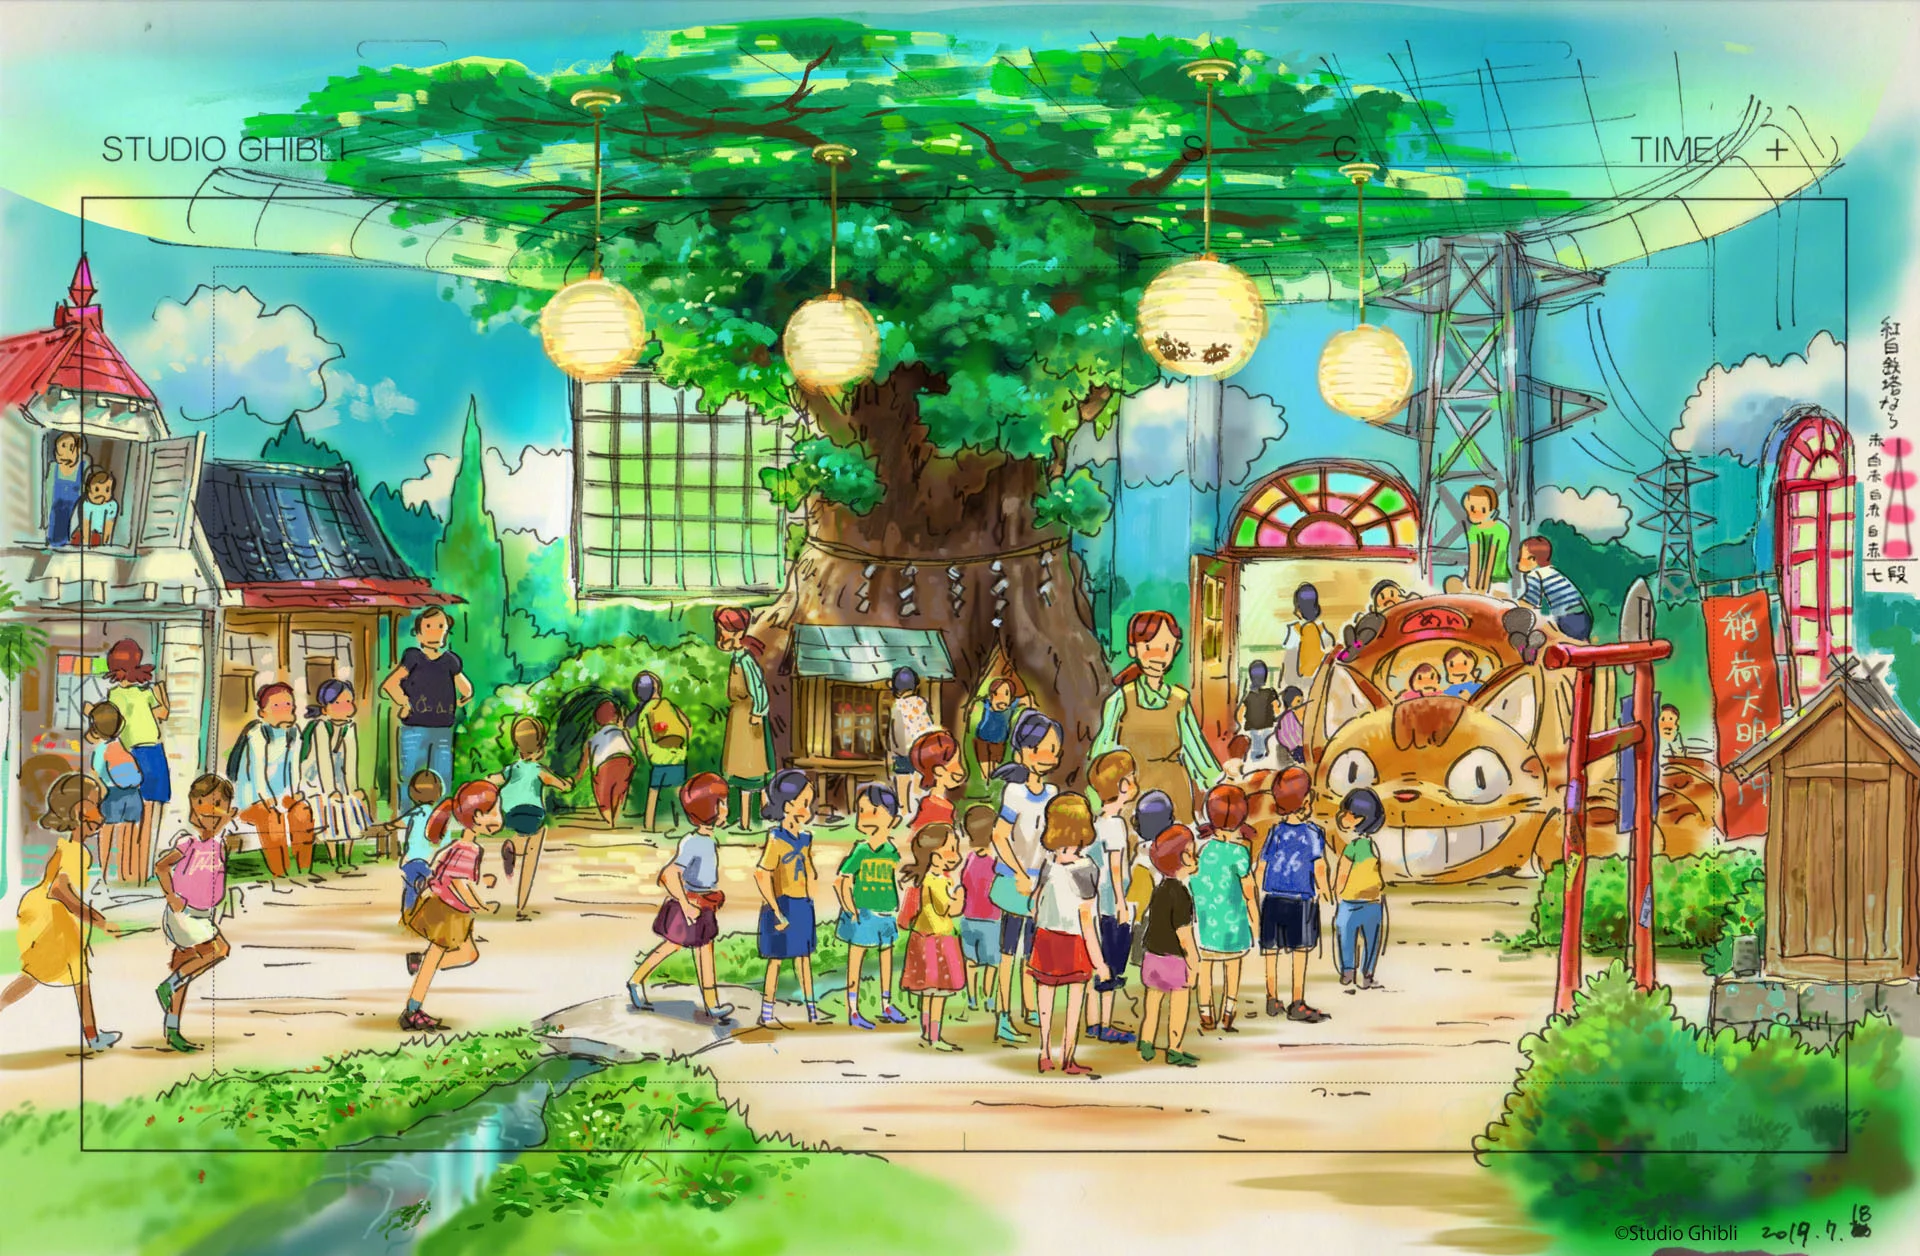 Ghibli Park will open on November 1st, it is located in Aichi-ken, Japan